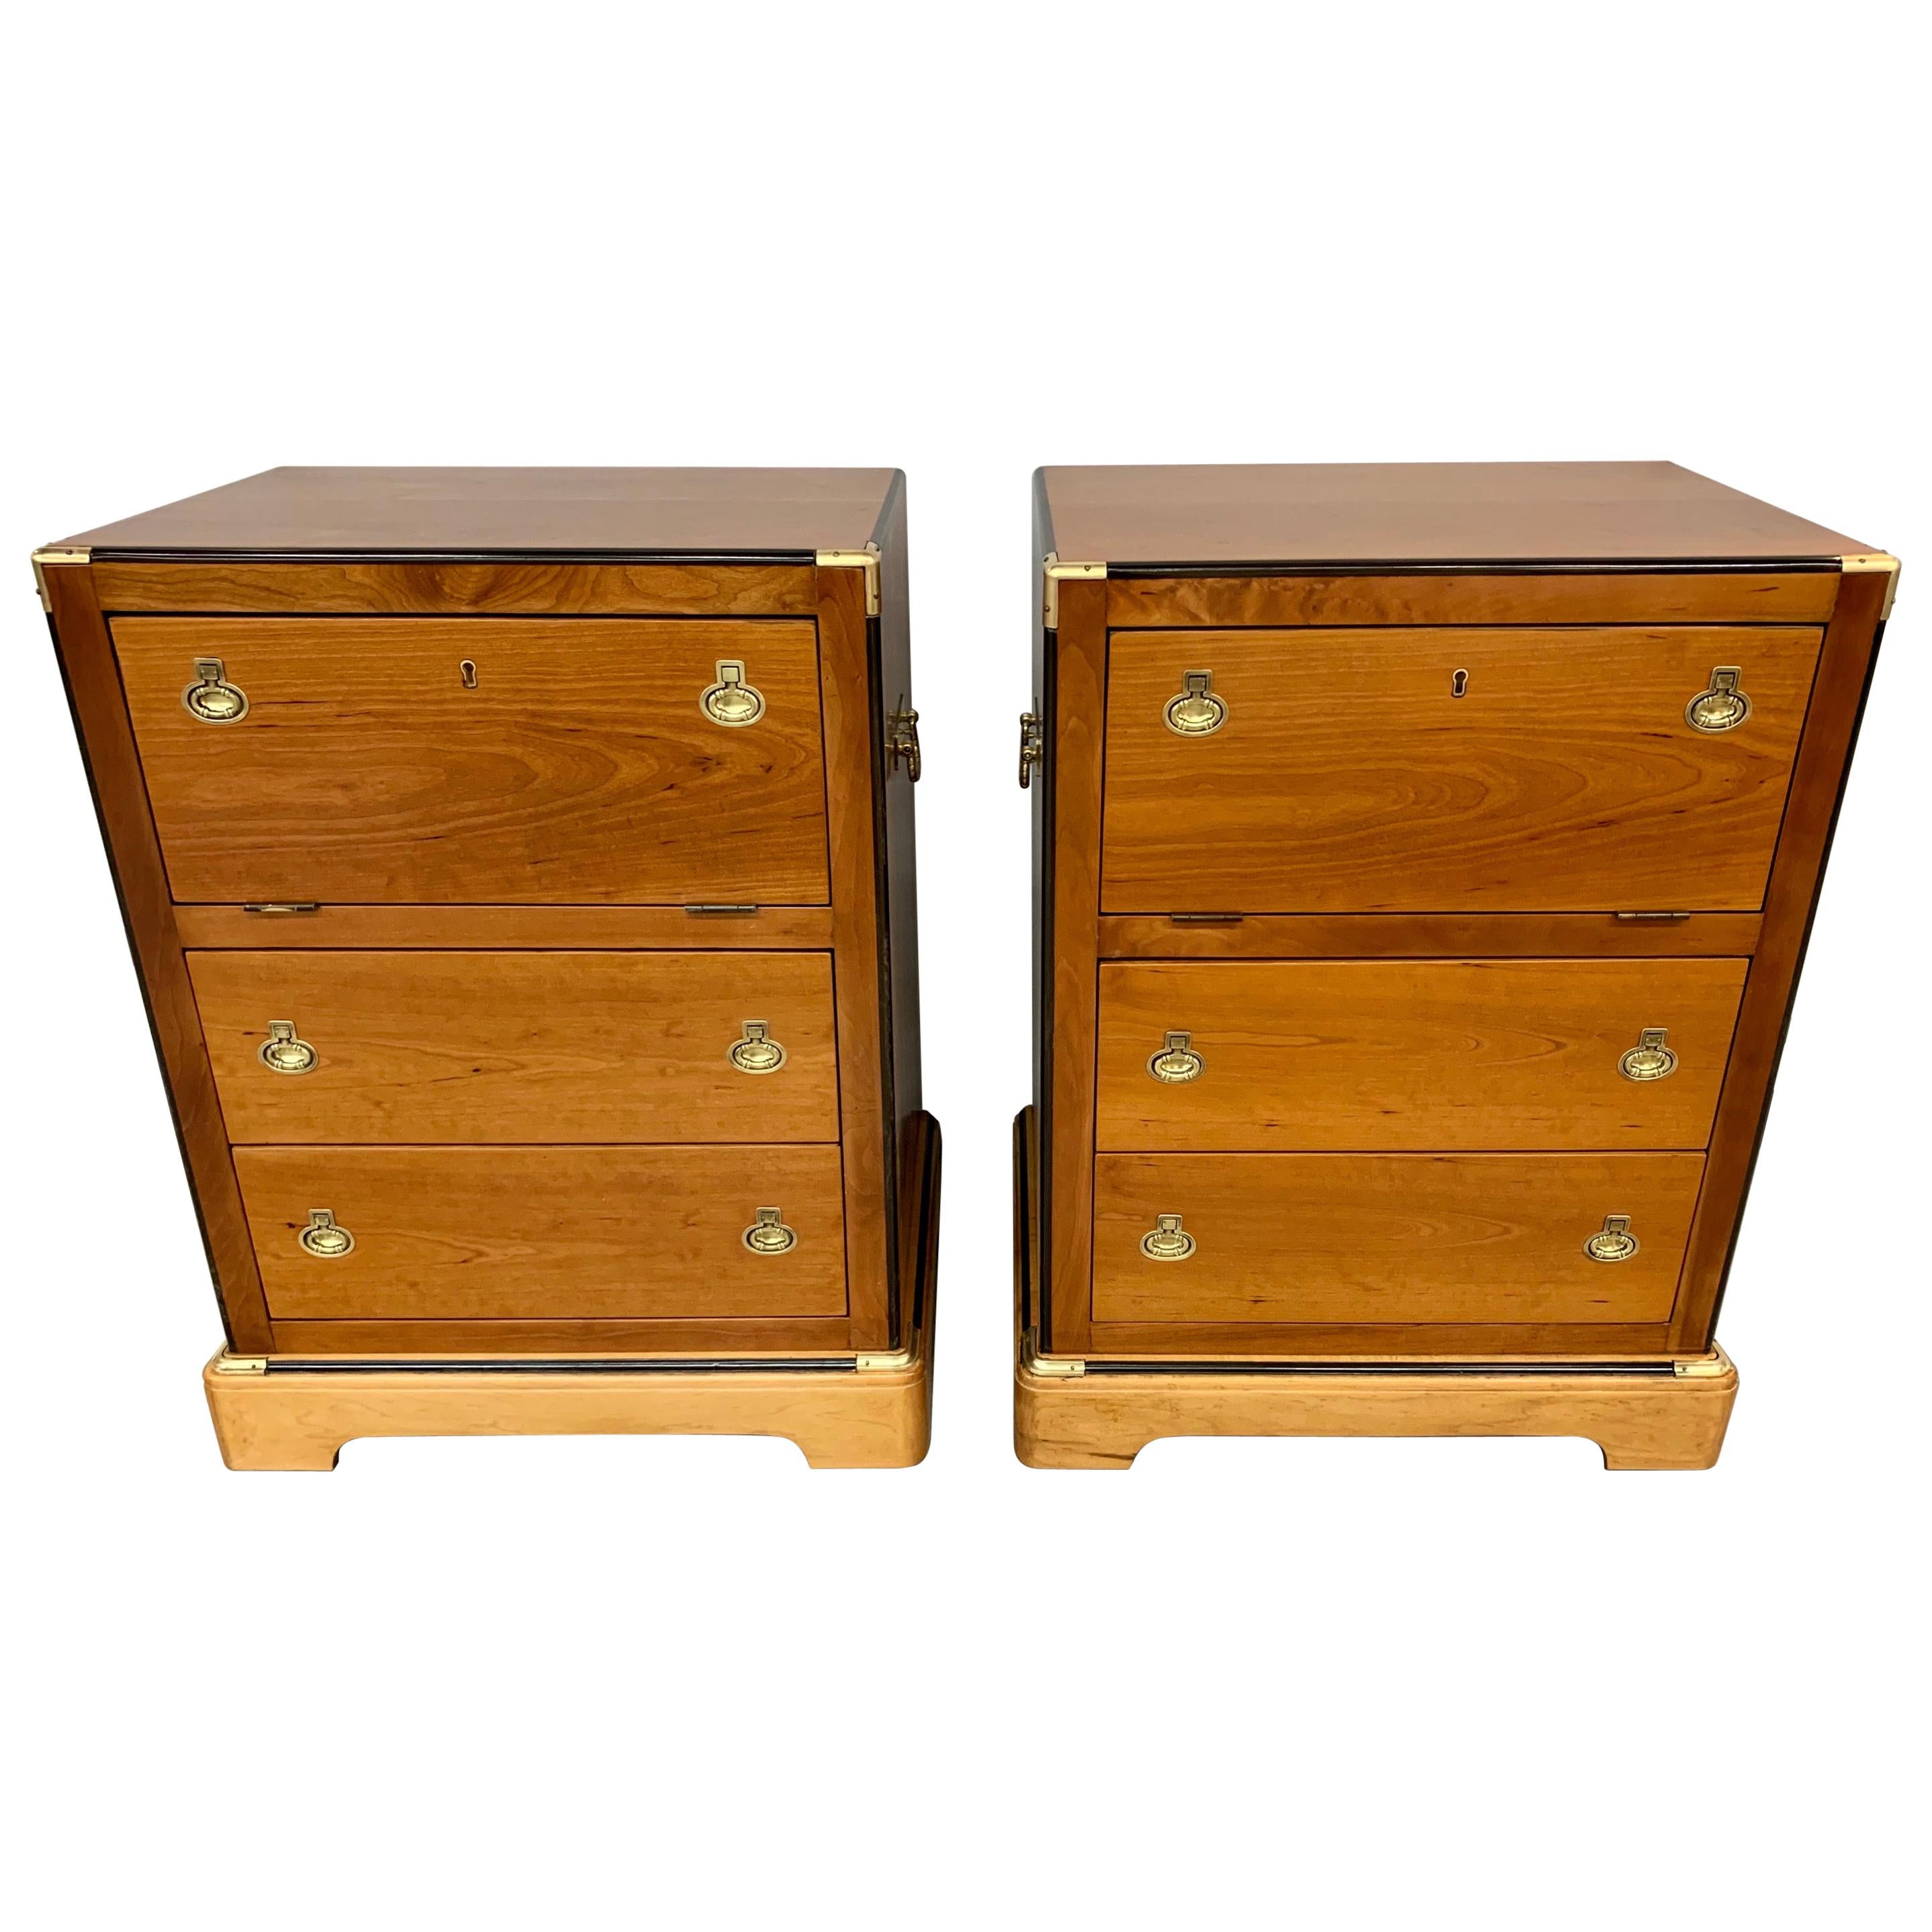 Pair of Fine Biedermeier Campaign Chests with Drop Down Drawer